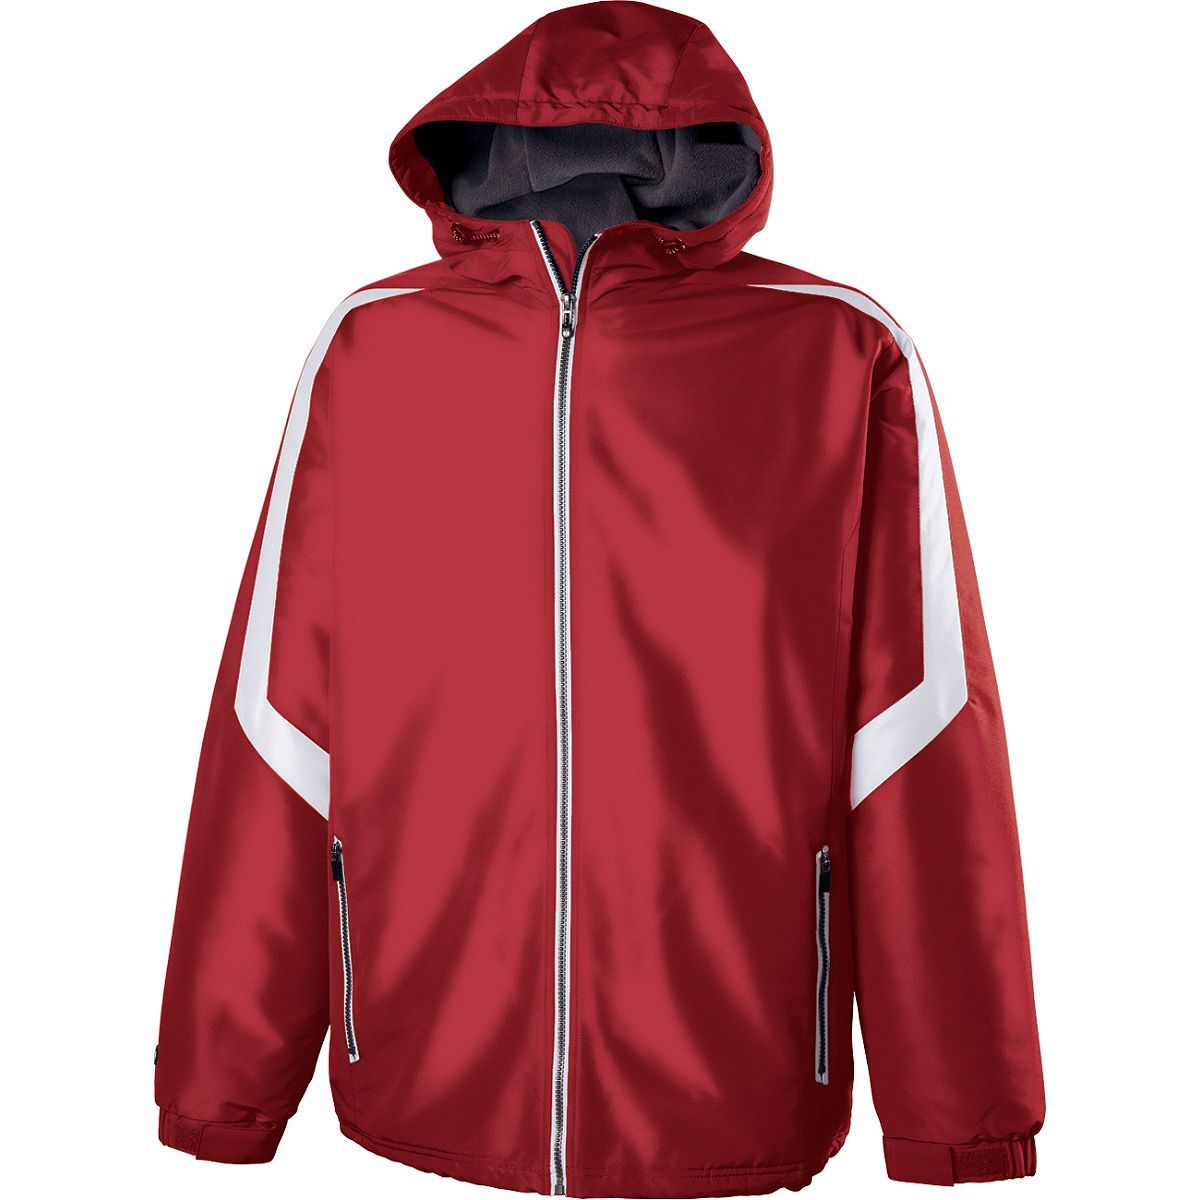 Holloway Sportswear 4XL Charger Jacket Scarlet/White 229059 - image 4 of 4